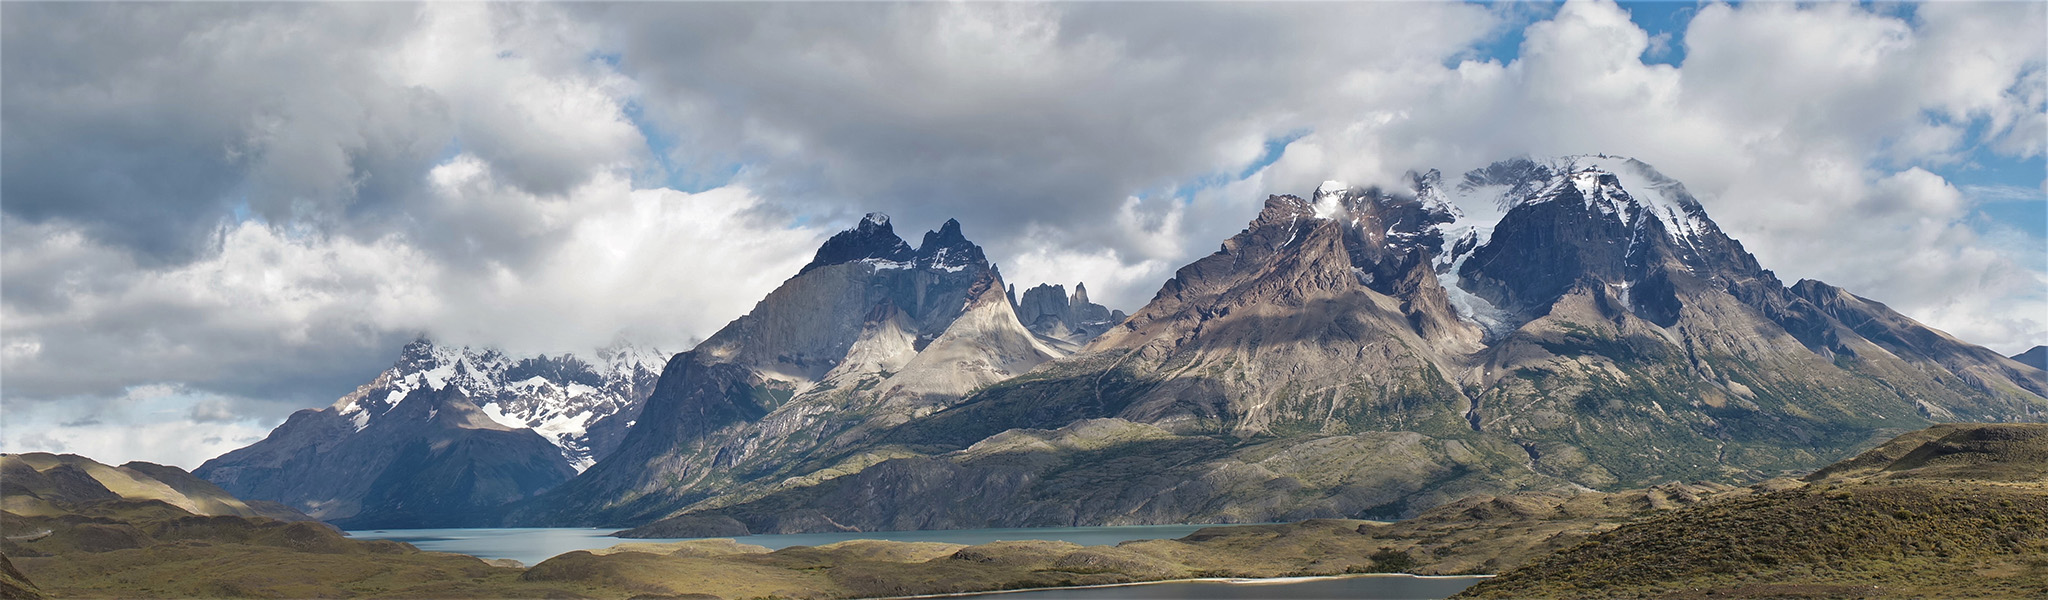 View of the snow-capped Chilean Andes (Torres del Paine National Park) with clouds overhead.